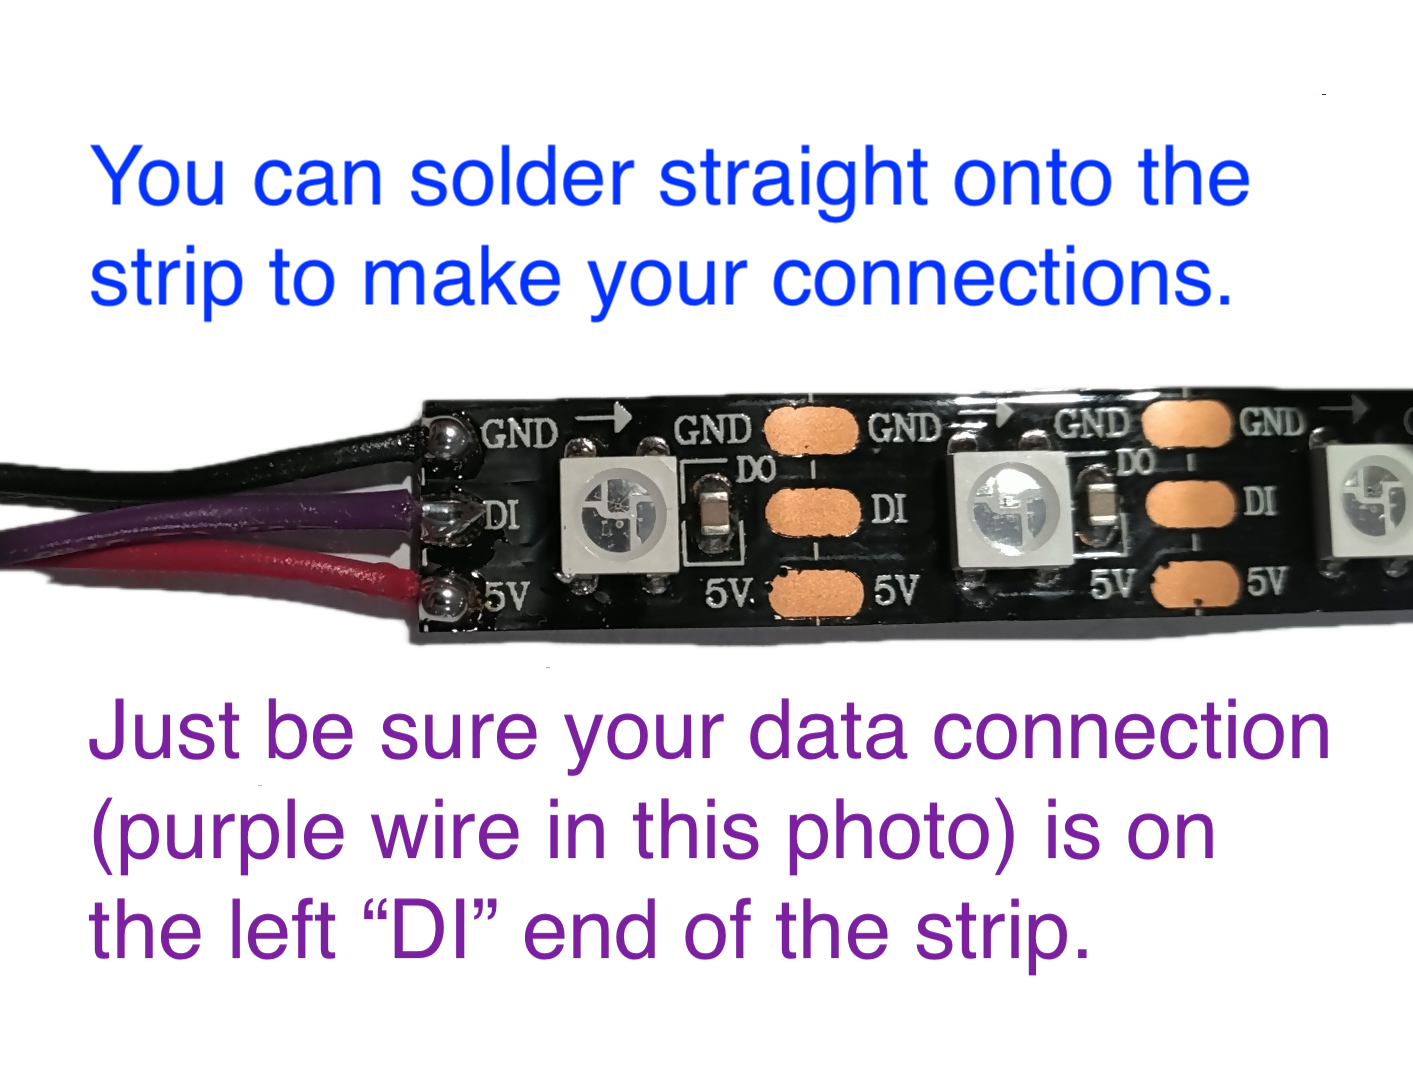 Closeup of left edge of LED strip. Three wires are soldered onto the strip's surface: a black wire is soldered to the top pin labeled "GND," a purple wire is soldered to the middle pin labeled "DI," and a red wire is soldered to the bottom pin labeled "5V." The image includes two sentences: "You can solder straight onto the strip to make your connections. Just be sure your data connection (purple wire in this photo) is on the left 'DI' end of the strip."